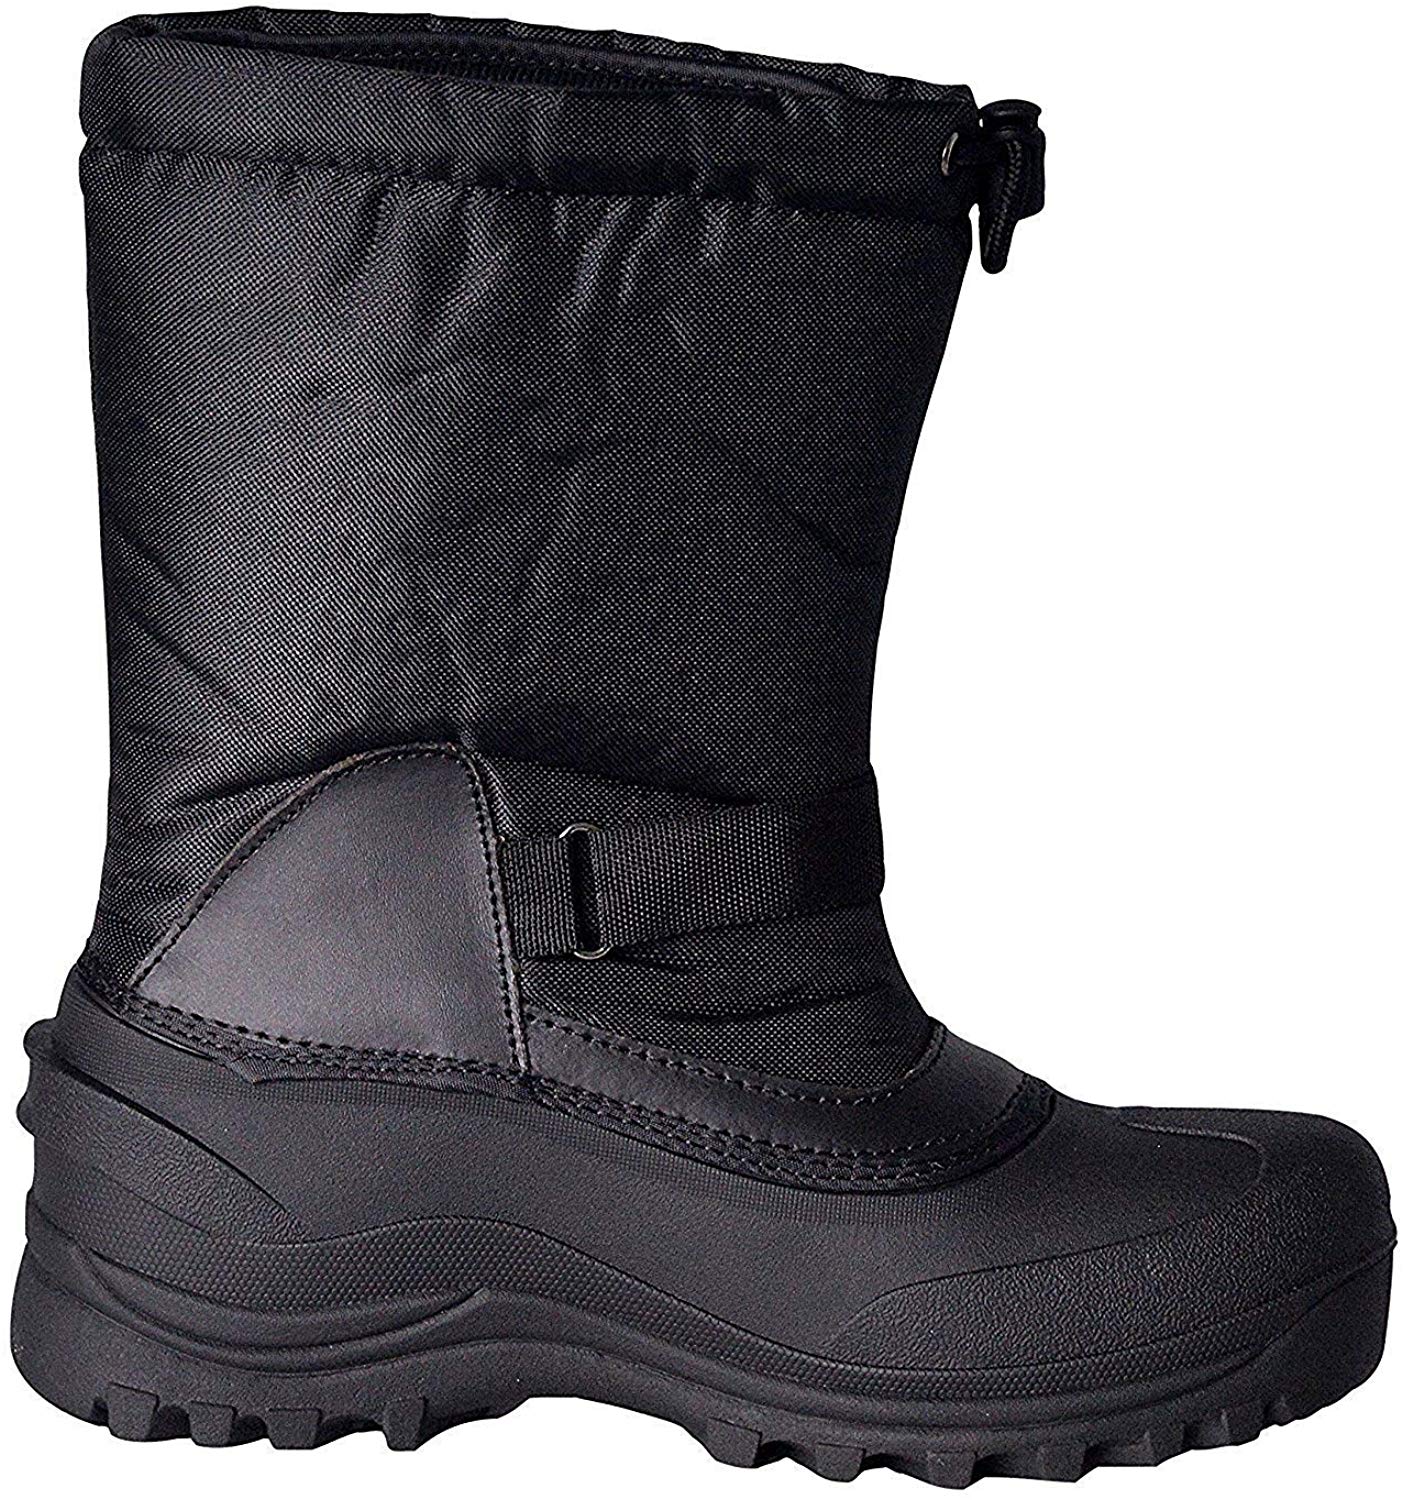 Men's Snow Boots - image 4 of 5